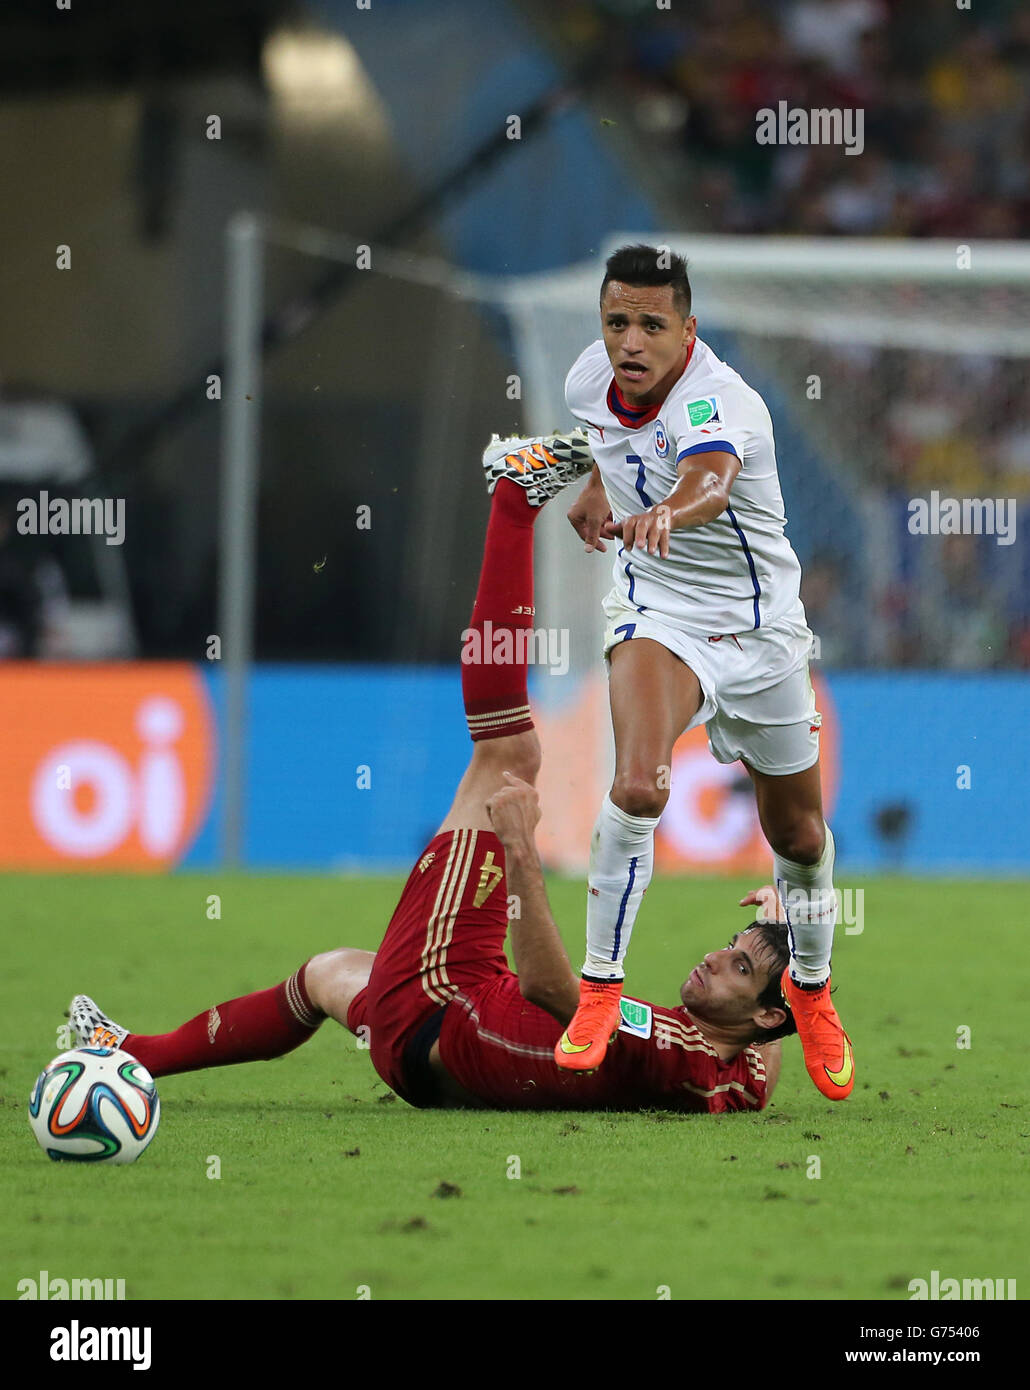 Soccer - FIFA World Cup 2014 - Group B - Spain v Chile - Maracana. Chile's Alexis Sanchez skips a challenge from Spain's Javi Martinez (floor) Stock Photo